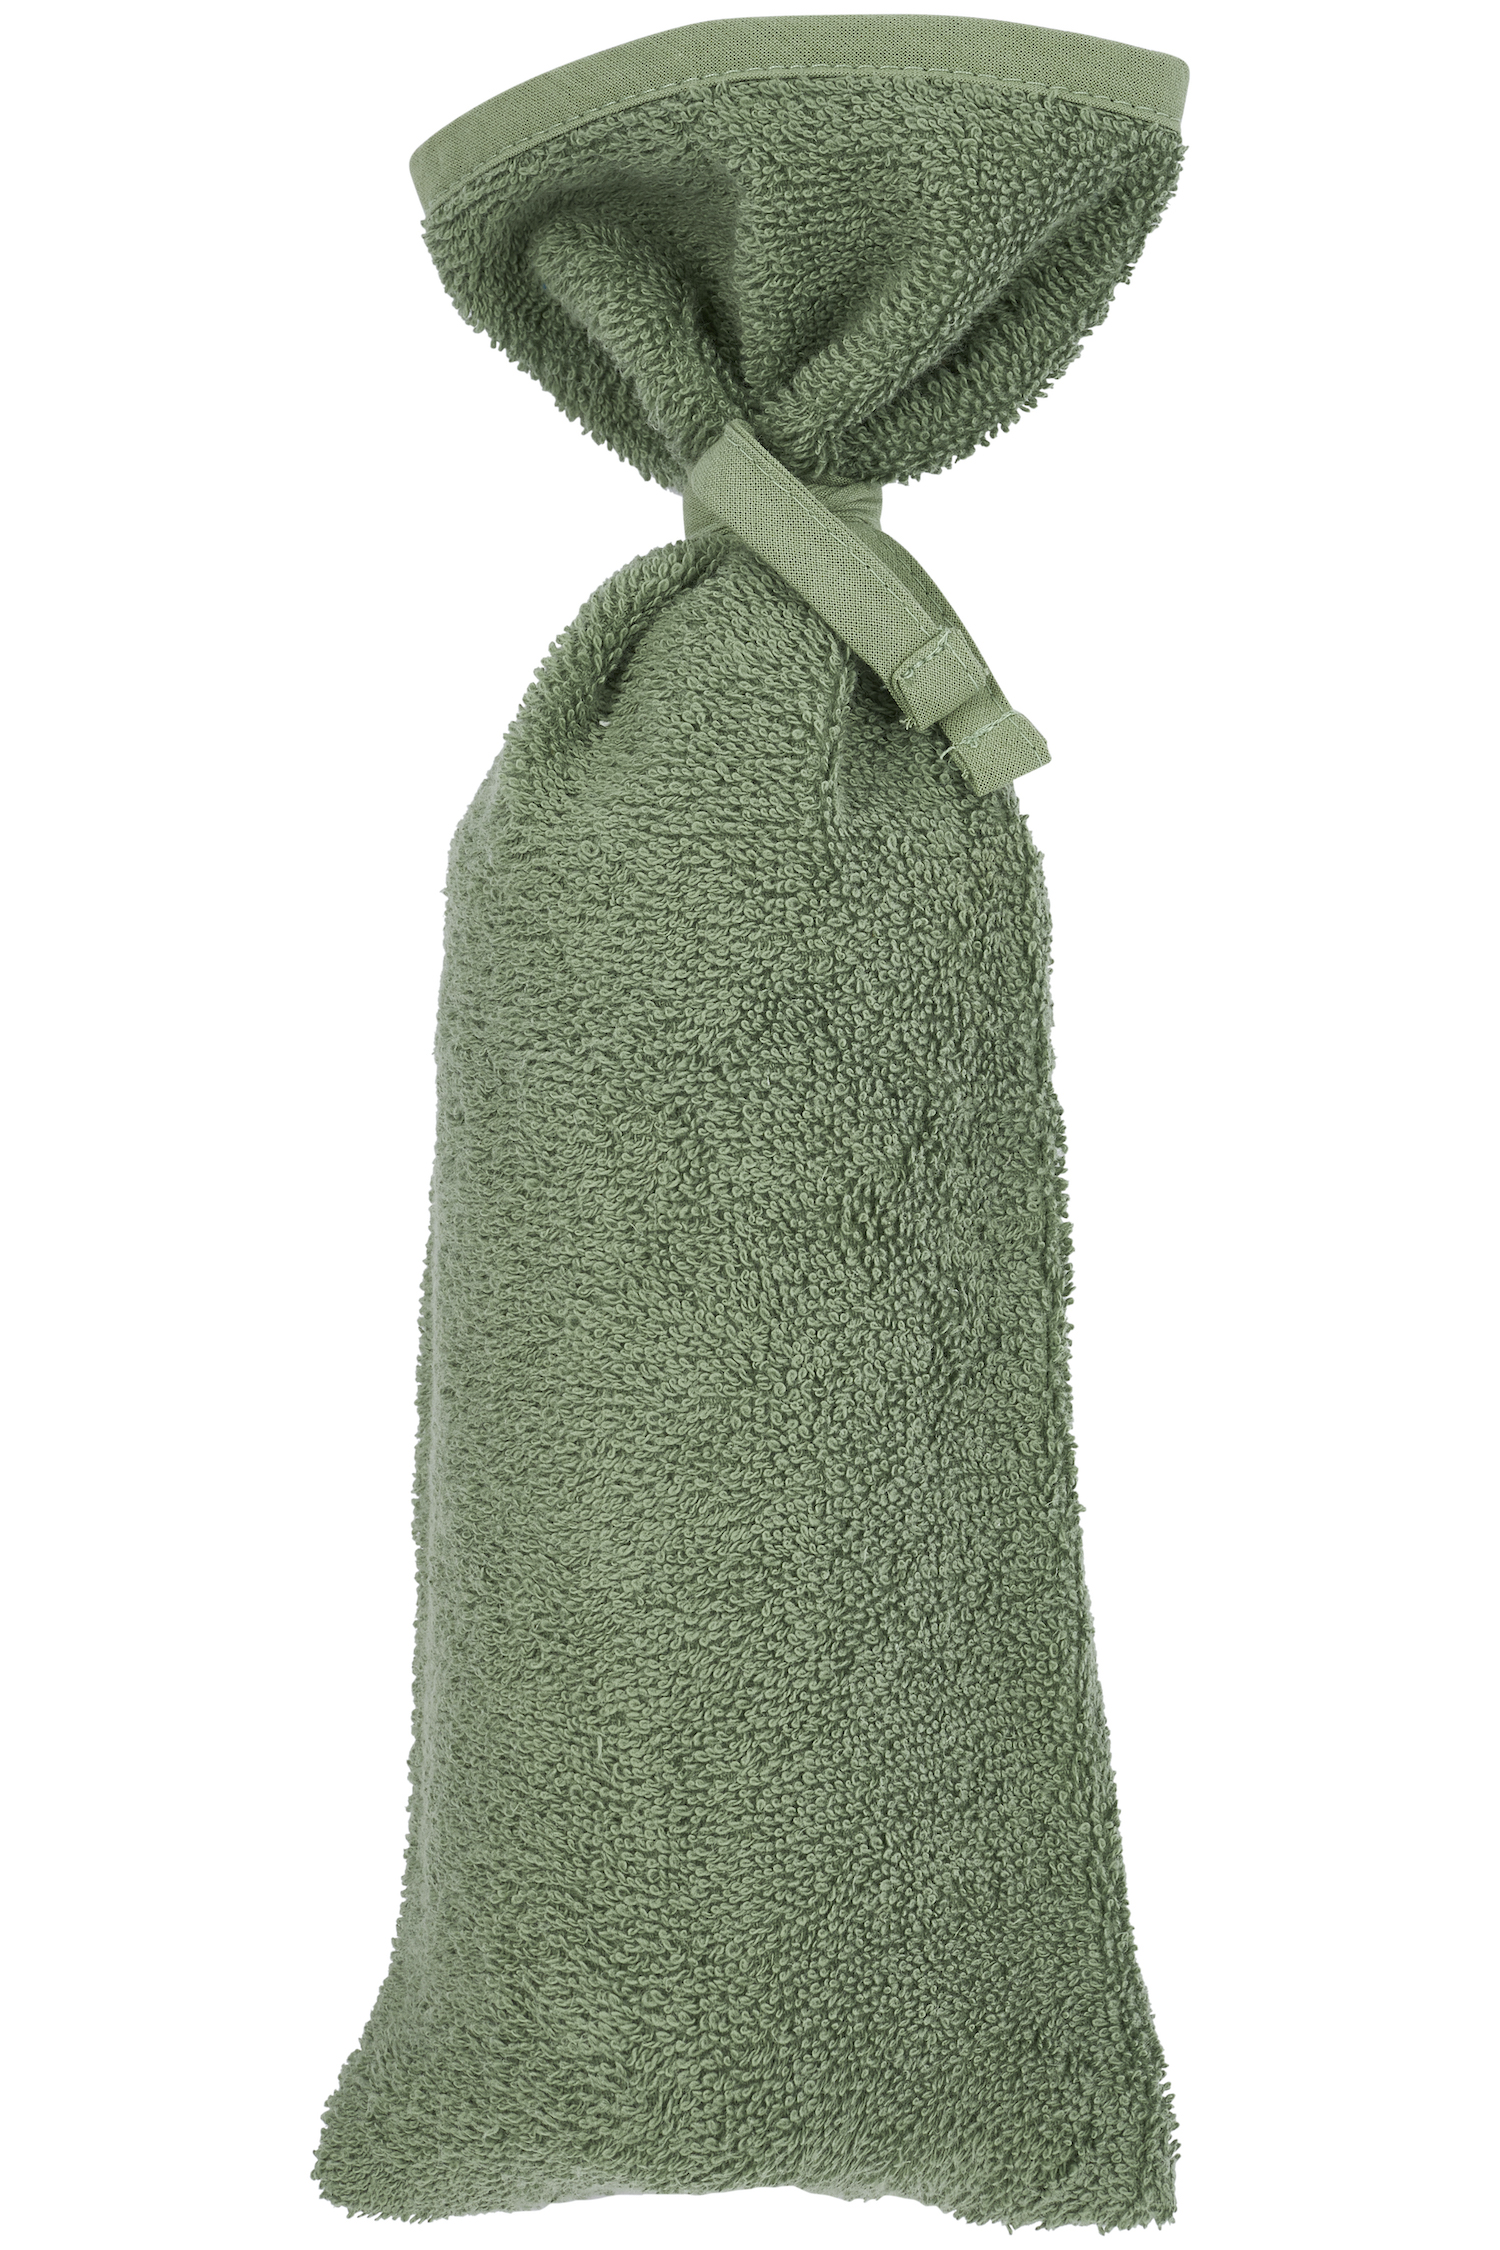 Hot Water Bottle Cover Basic Terry - Forest Green - 13xh35cm